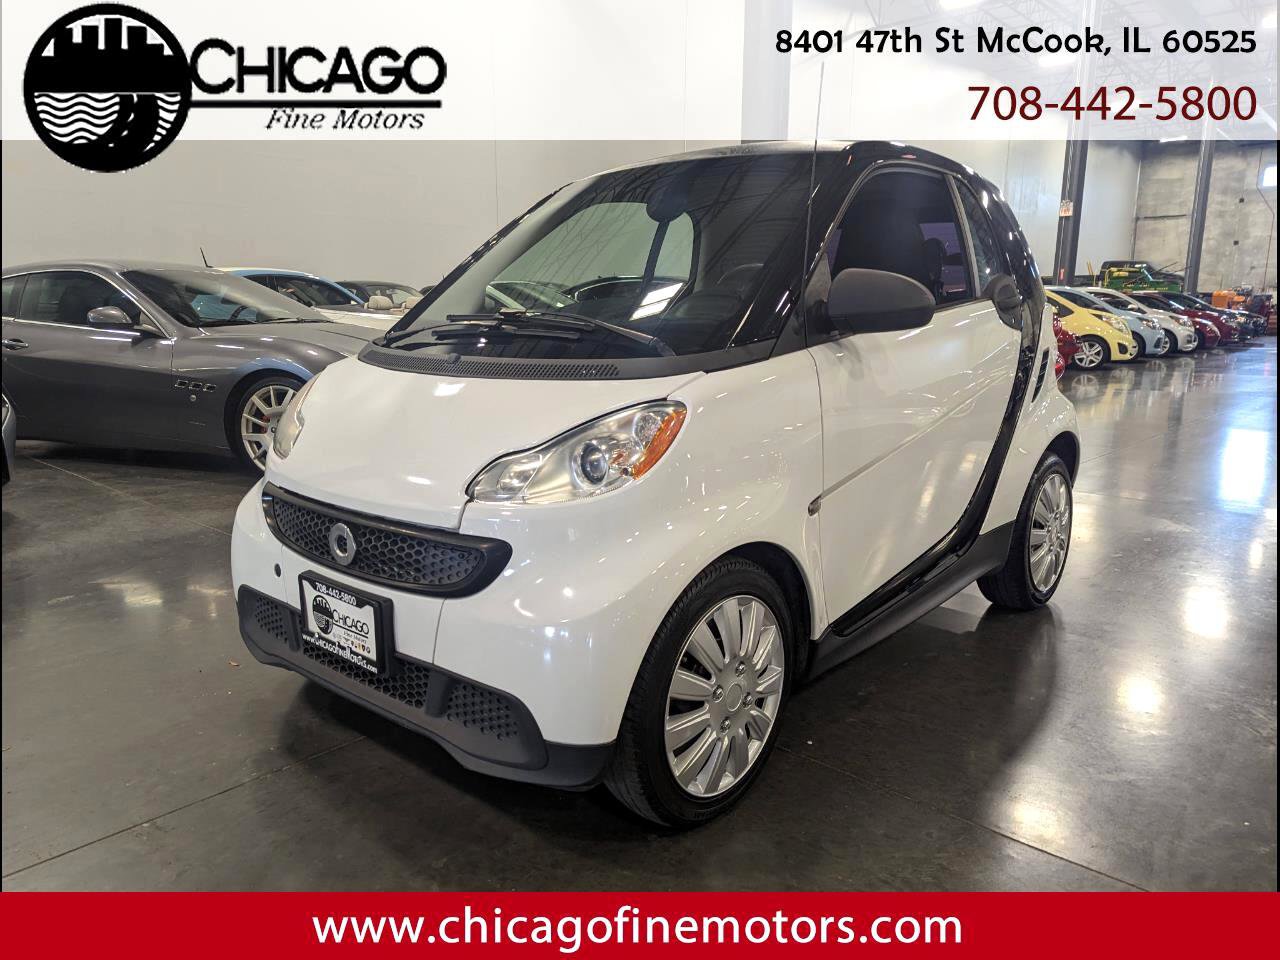 Used 2013 smart fortwo for Sale Right Now - Autotrader